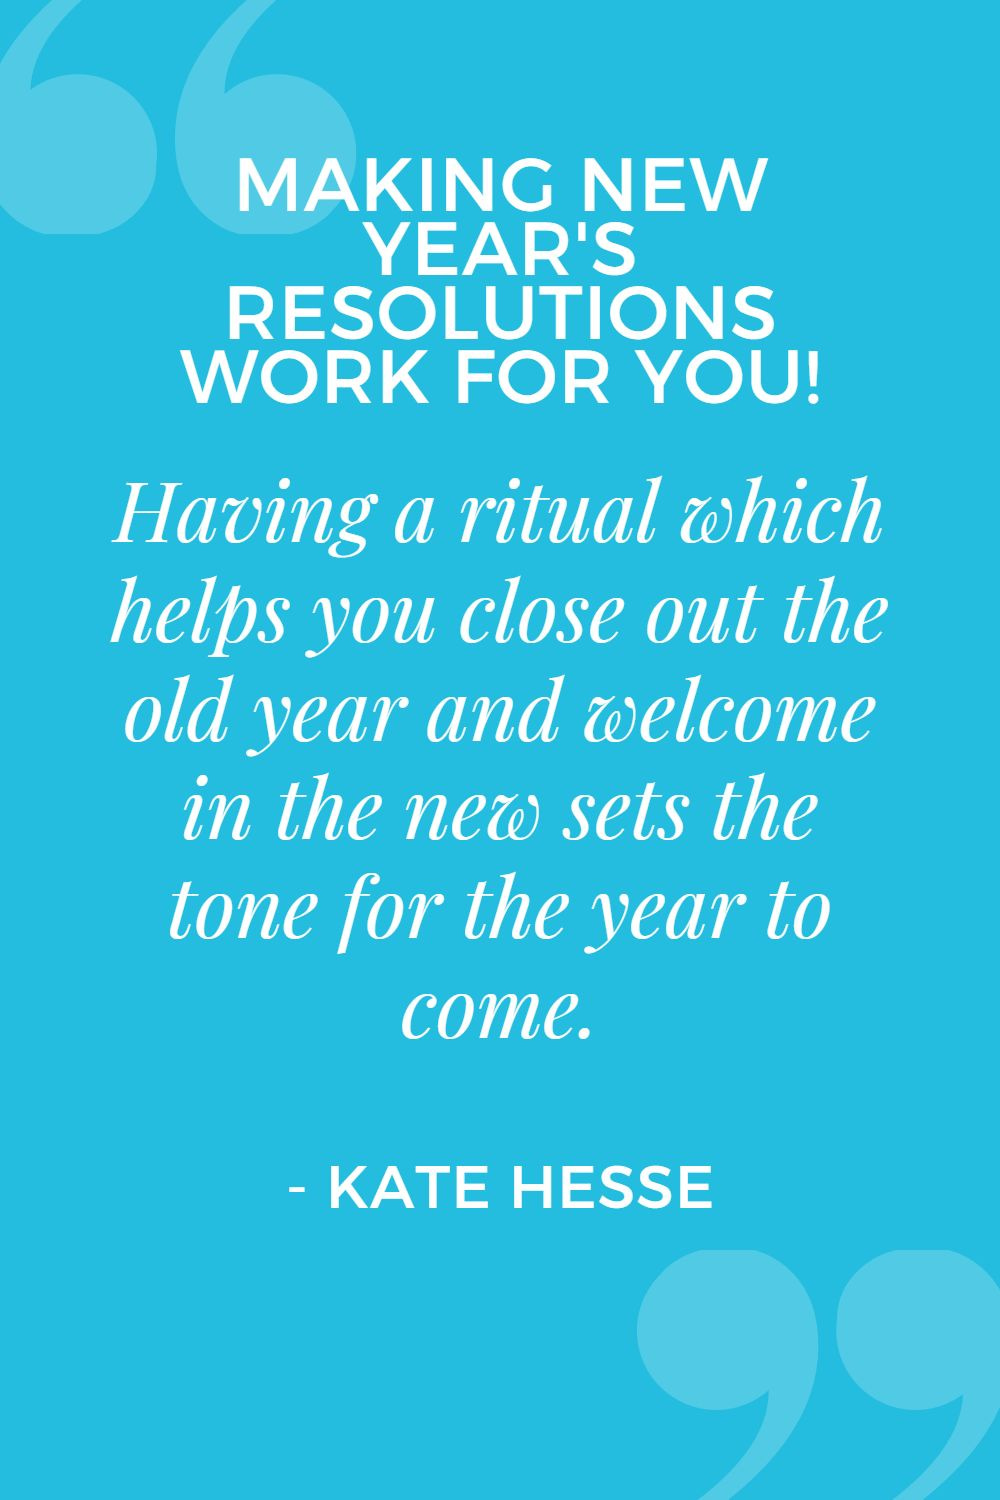 Having a ritual which helps you close out the old year and welcome in the new sets the tone for the year to come.